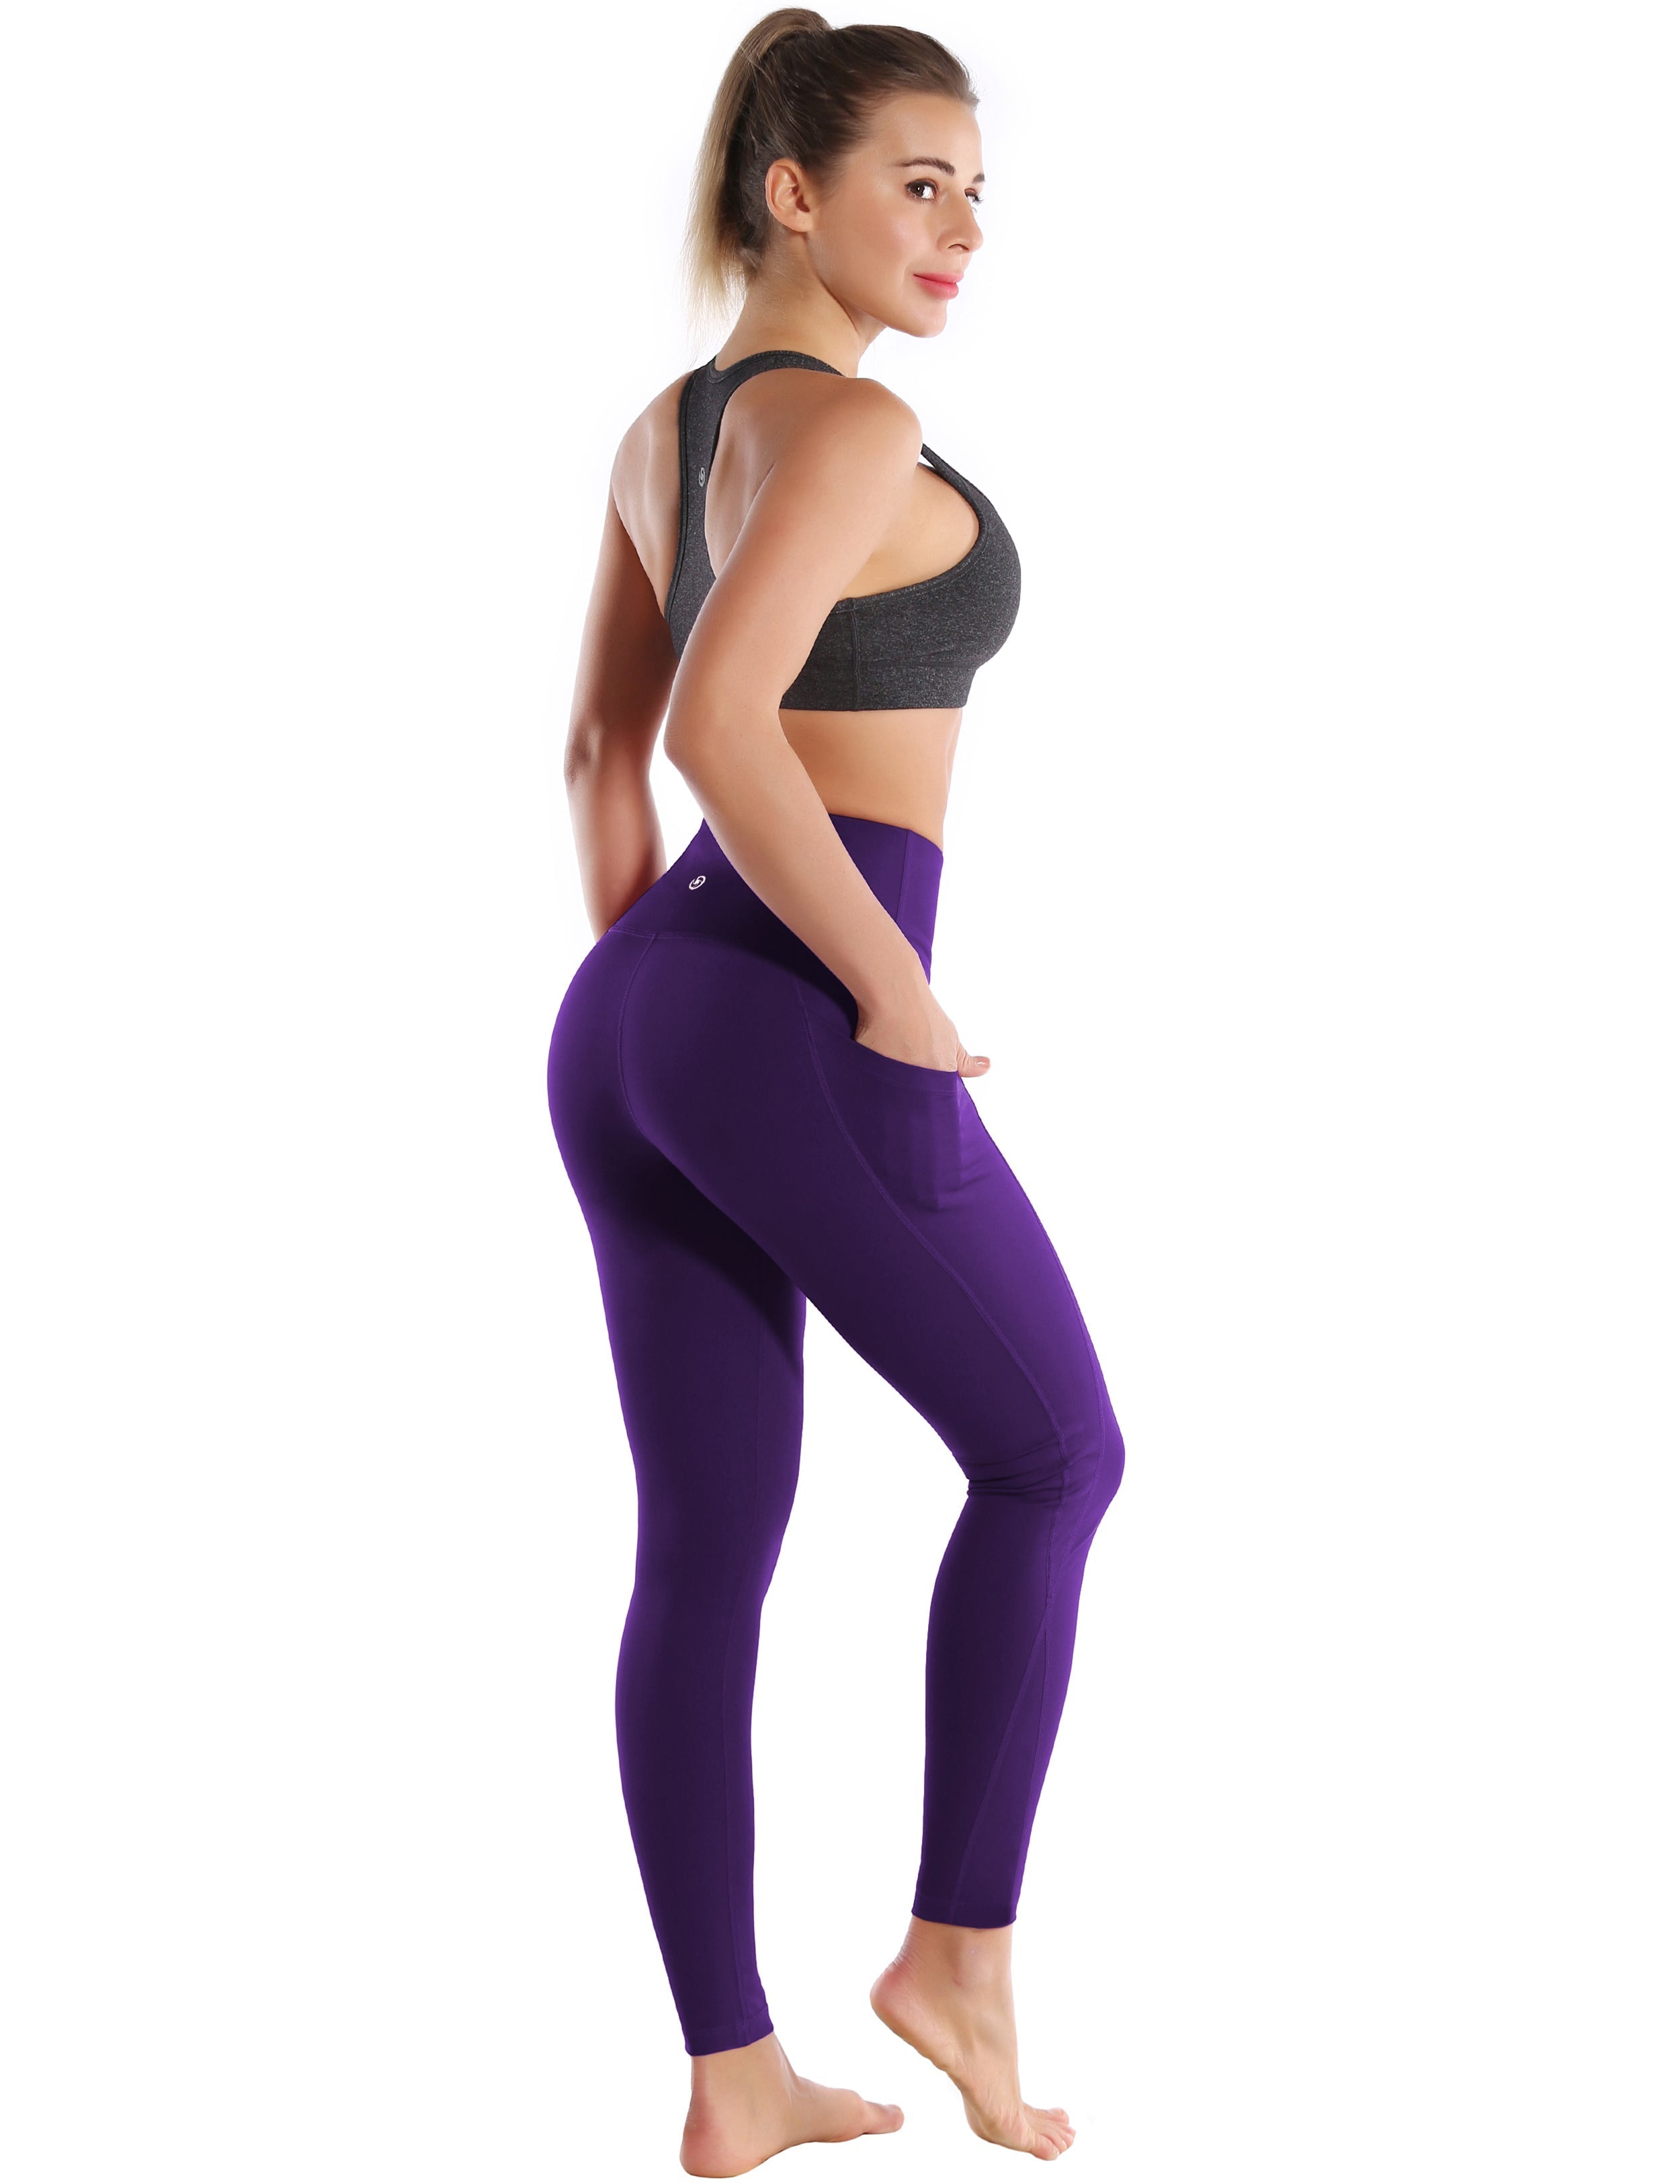 High Waist Side Pockets Tall Size Pants grapevine 75% Nylon, 25% Spandex Fabric doesn't attract lint easily 4-way stretch No see-through Moisture-wicking Tummy control Inner pocket